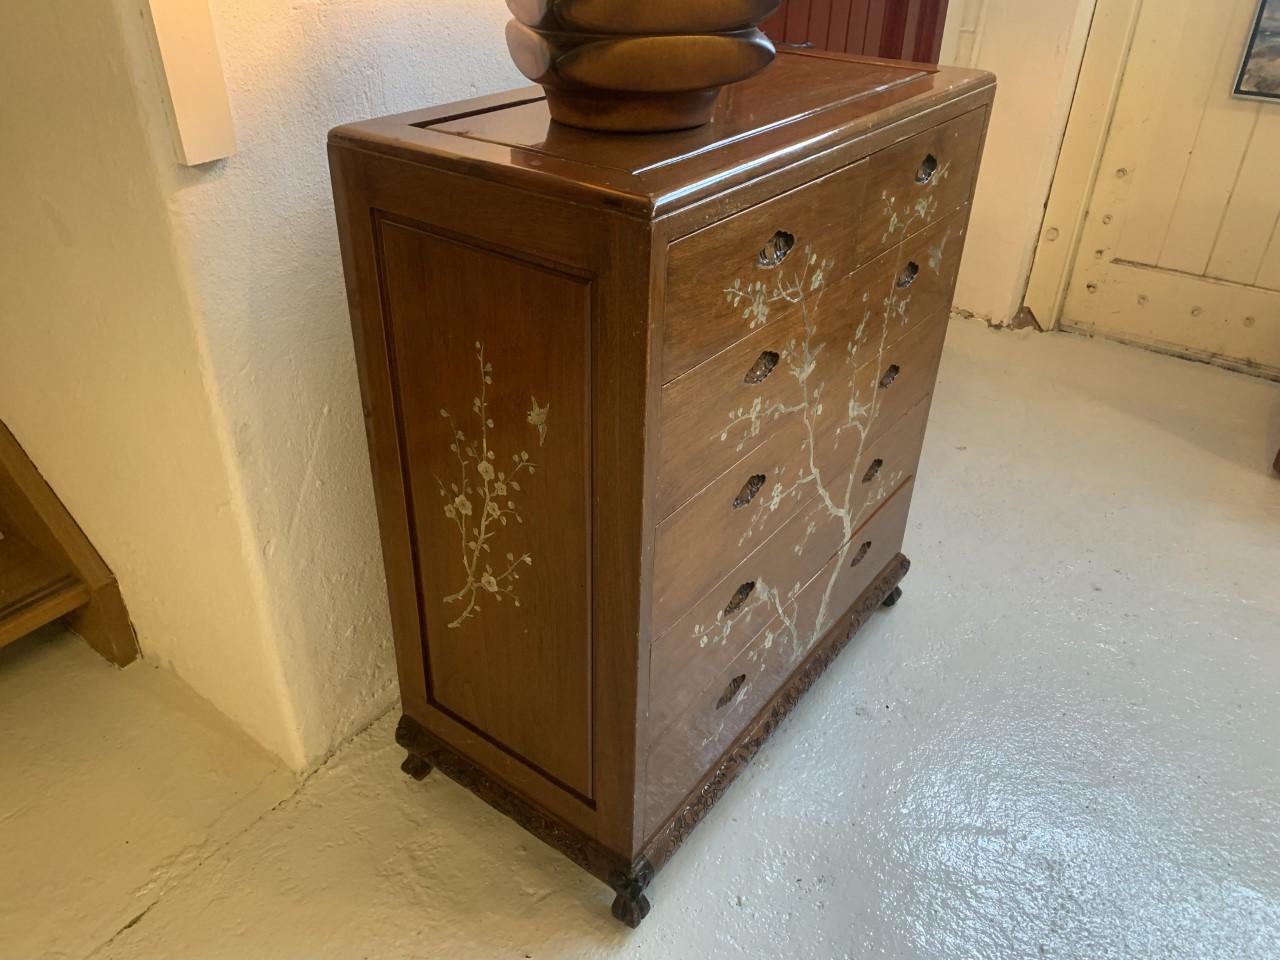 Elegant Chinoiserie Chest of drawers with pearl inlay.
Around 1900 this Chinoiserie style and furniture from the Orient were highly in Fashion in Paris... So French furniture makers started to craft them themselves.
The pearl inlay is very elegant